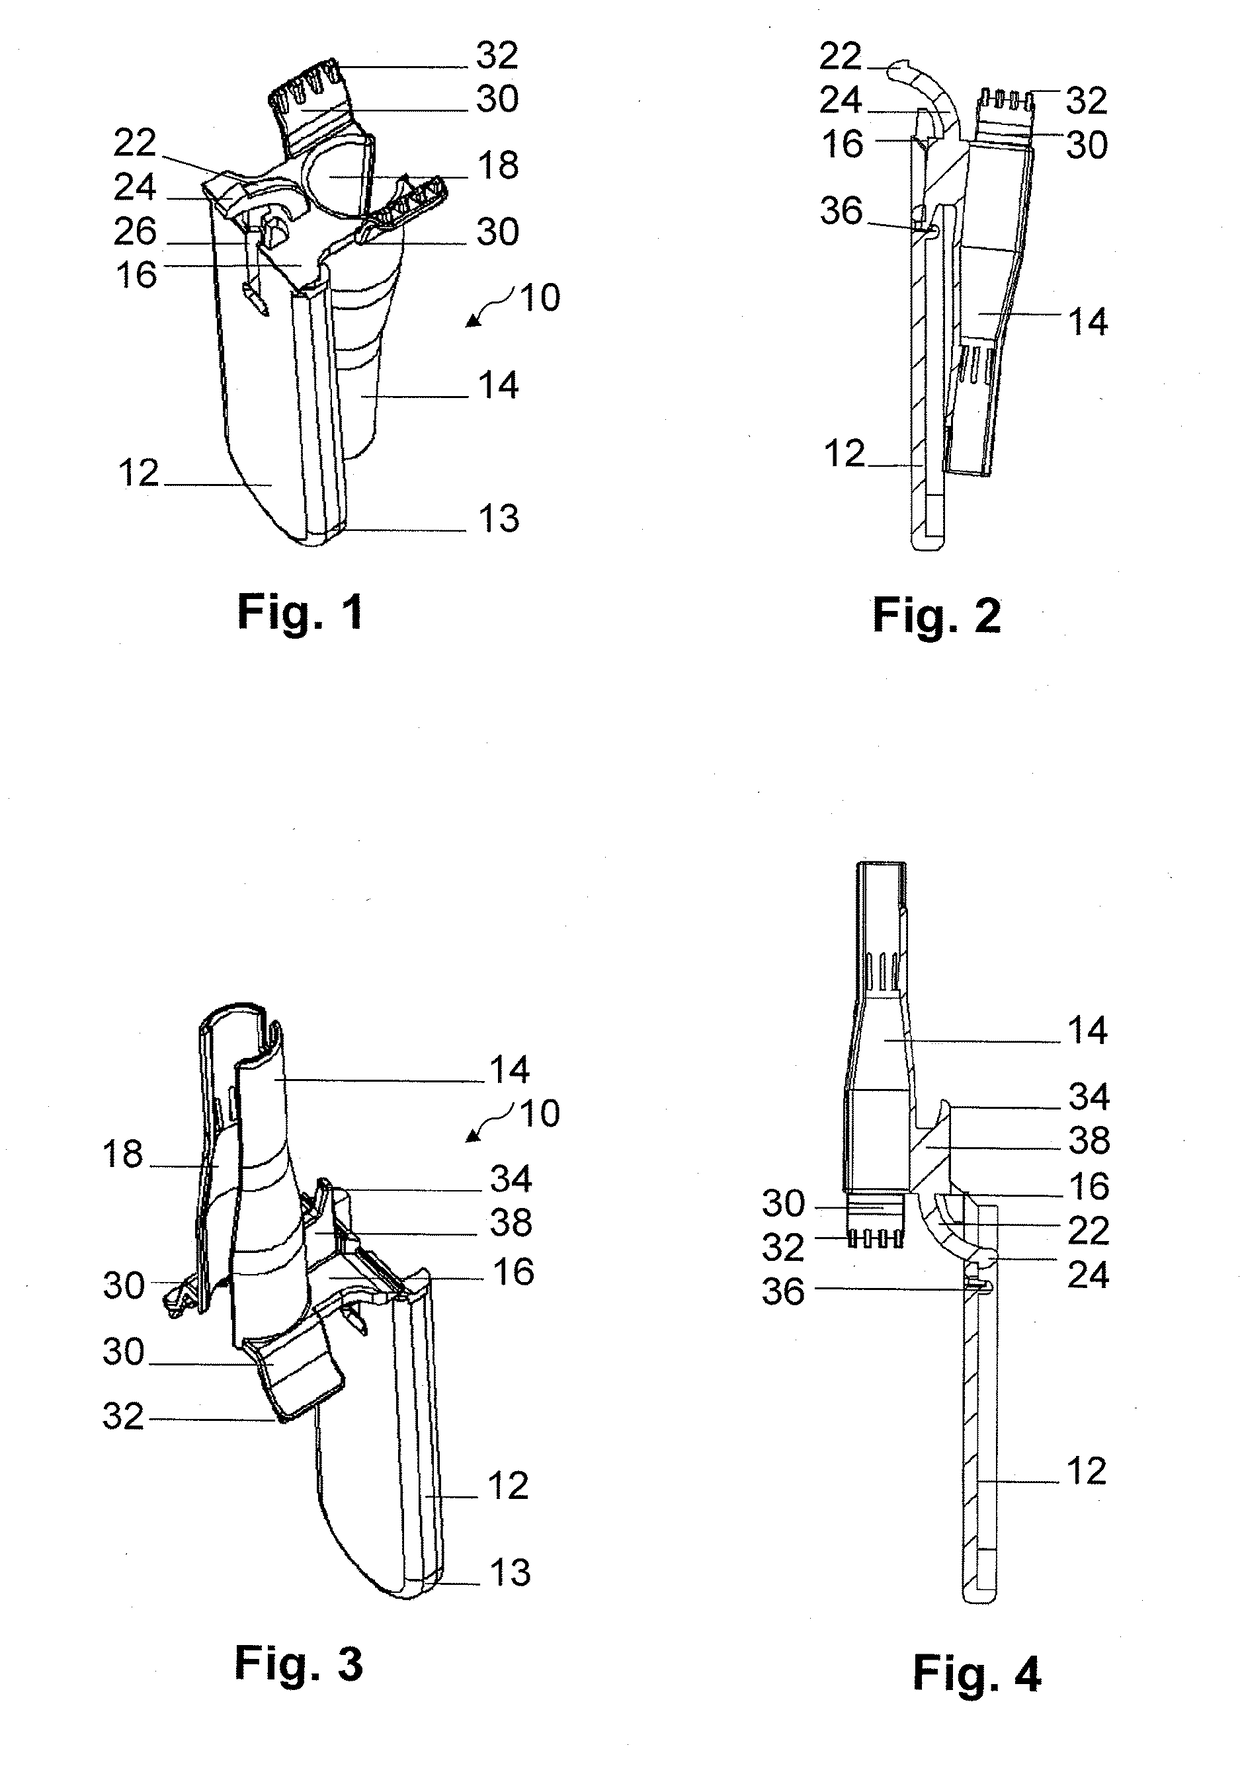 A folding device to assist in self insertion of a catheter tube into the urethral orifice of women